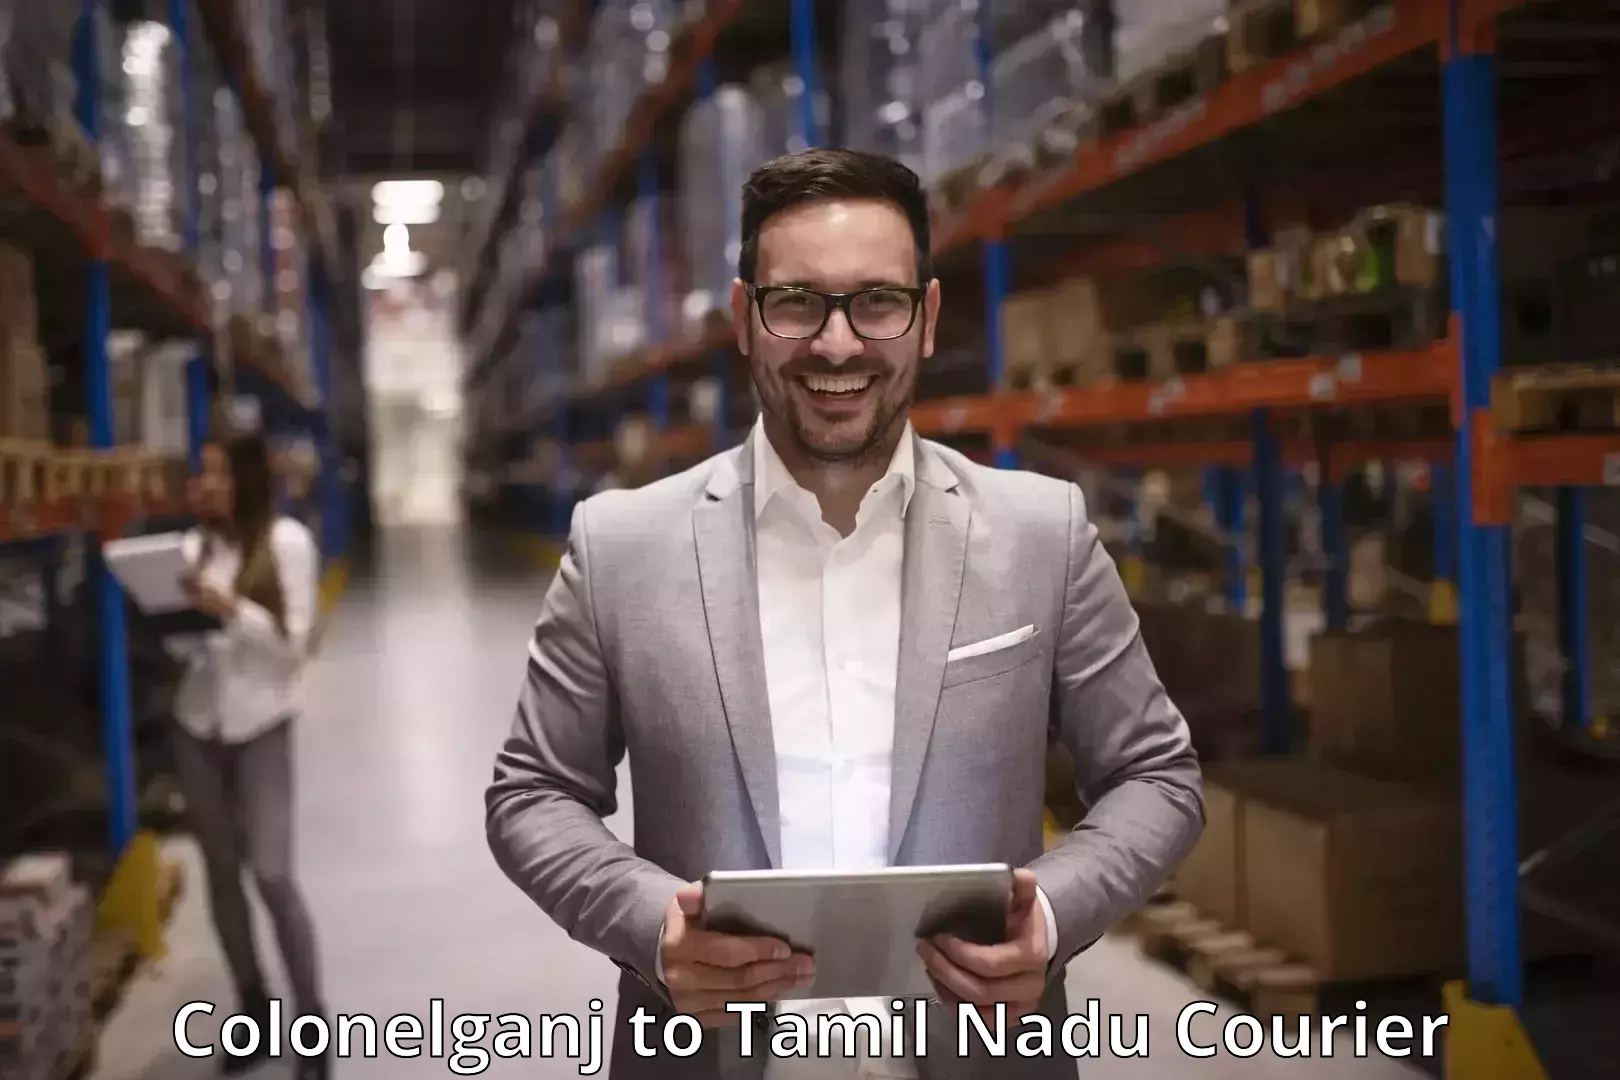 State-of-the-art courier technology Colonelganj to Manamelkudi